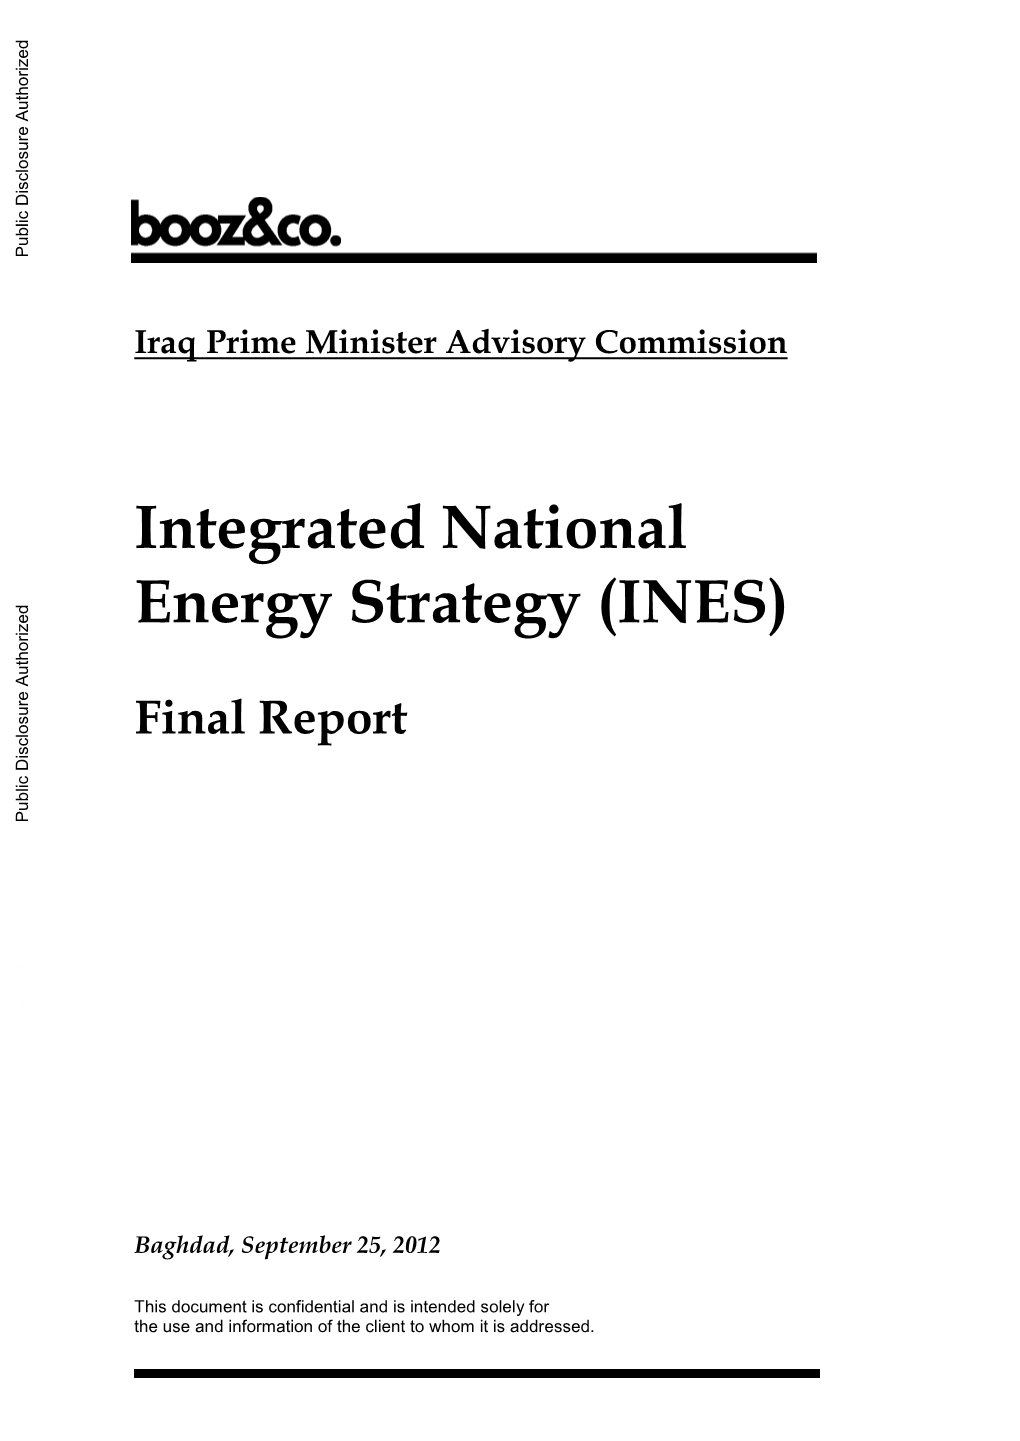 Integrated National Energy Strategy (INES)